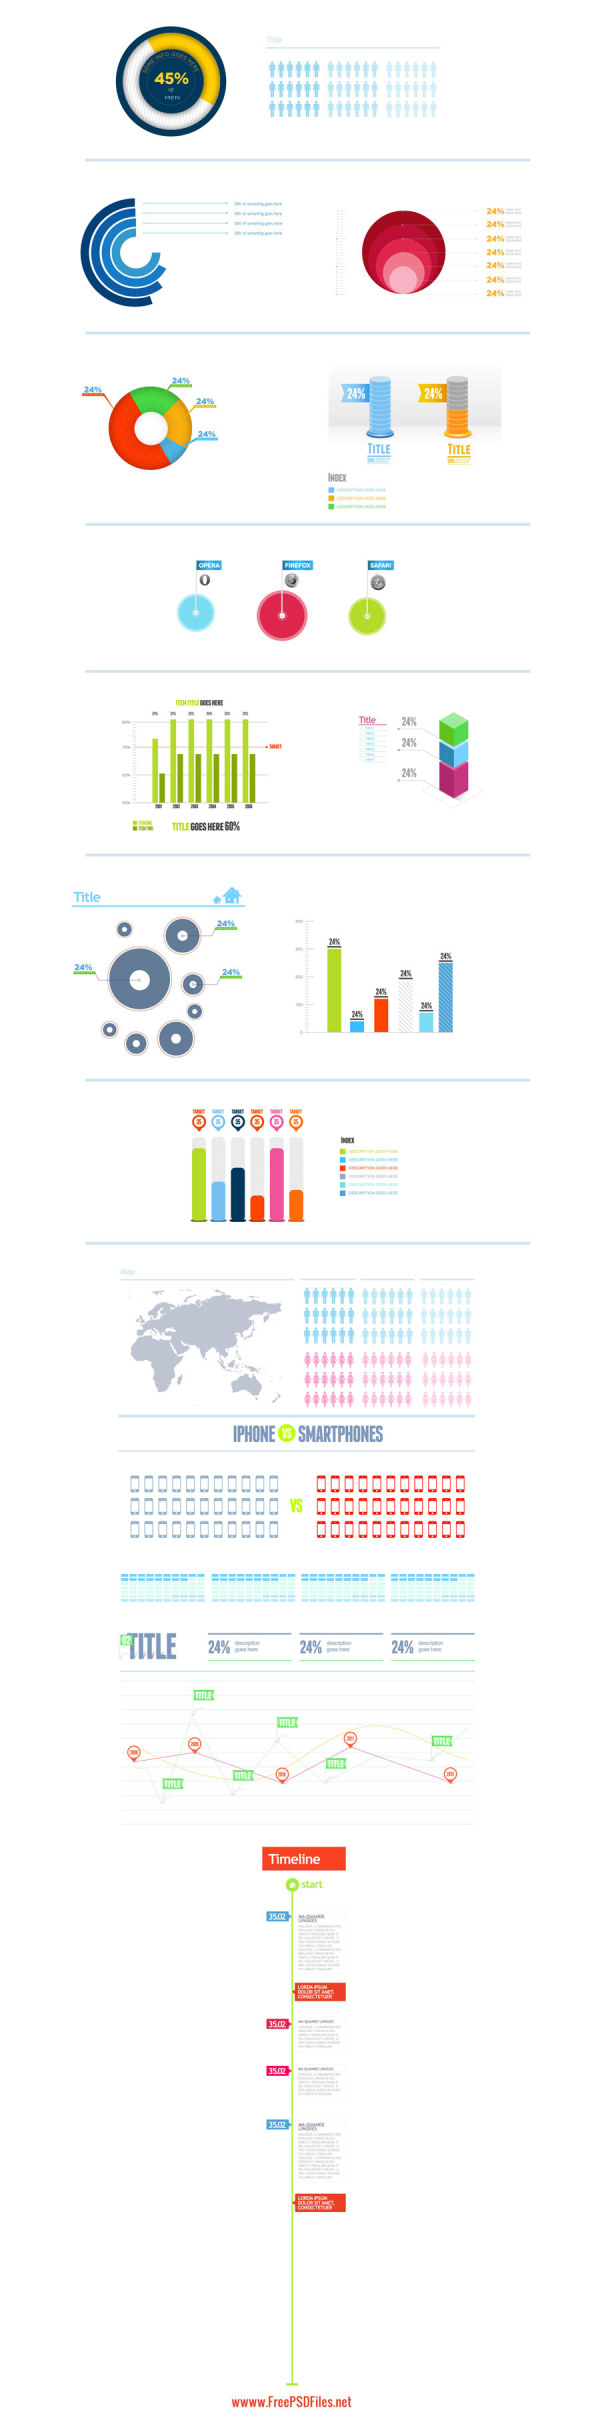 Business infographics psd material 01